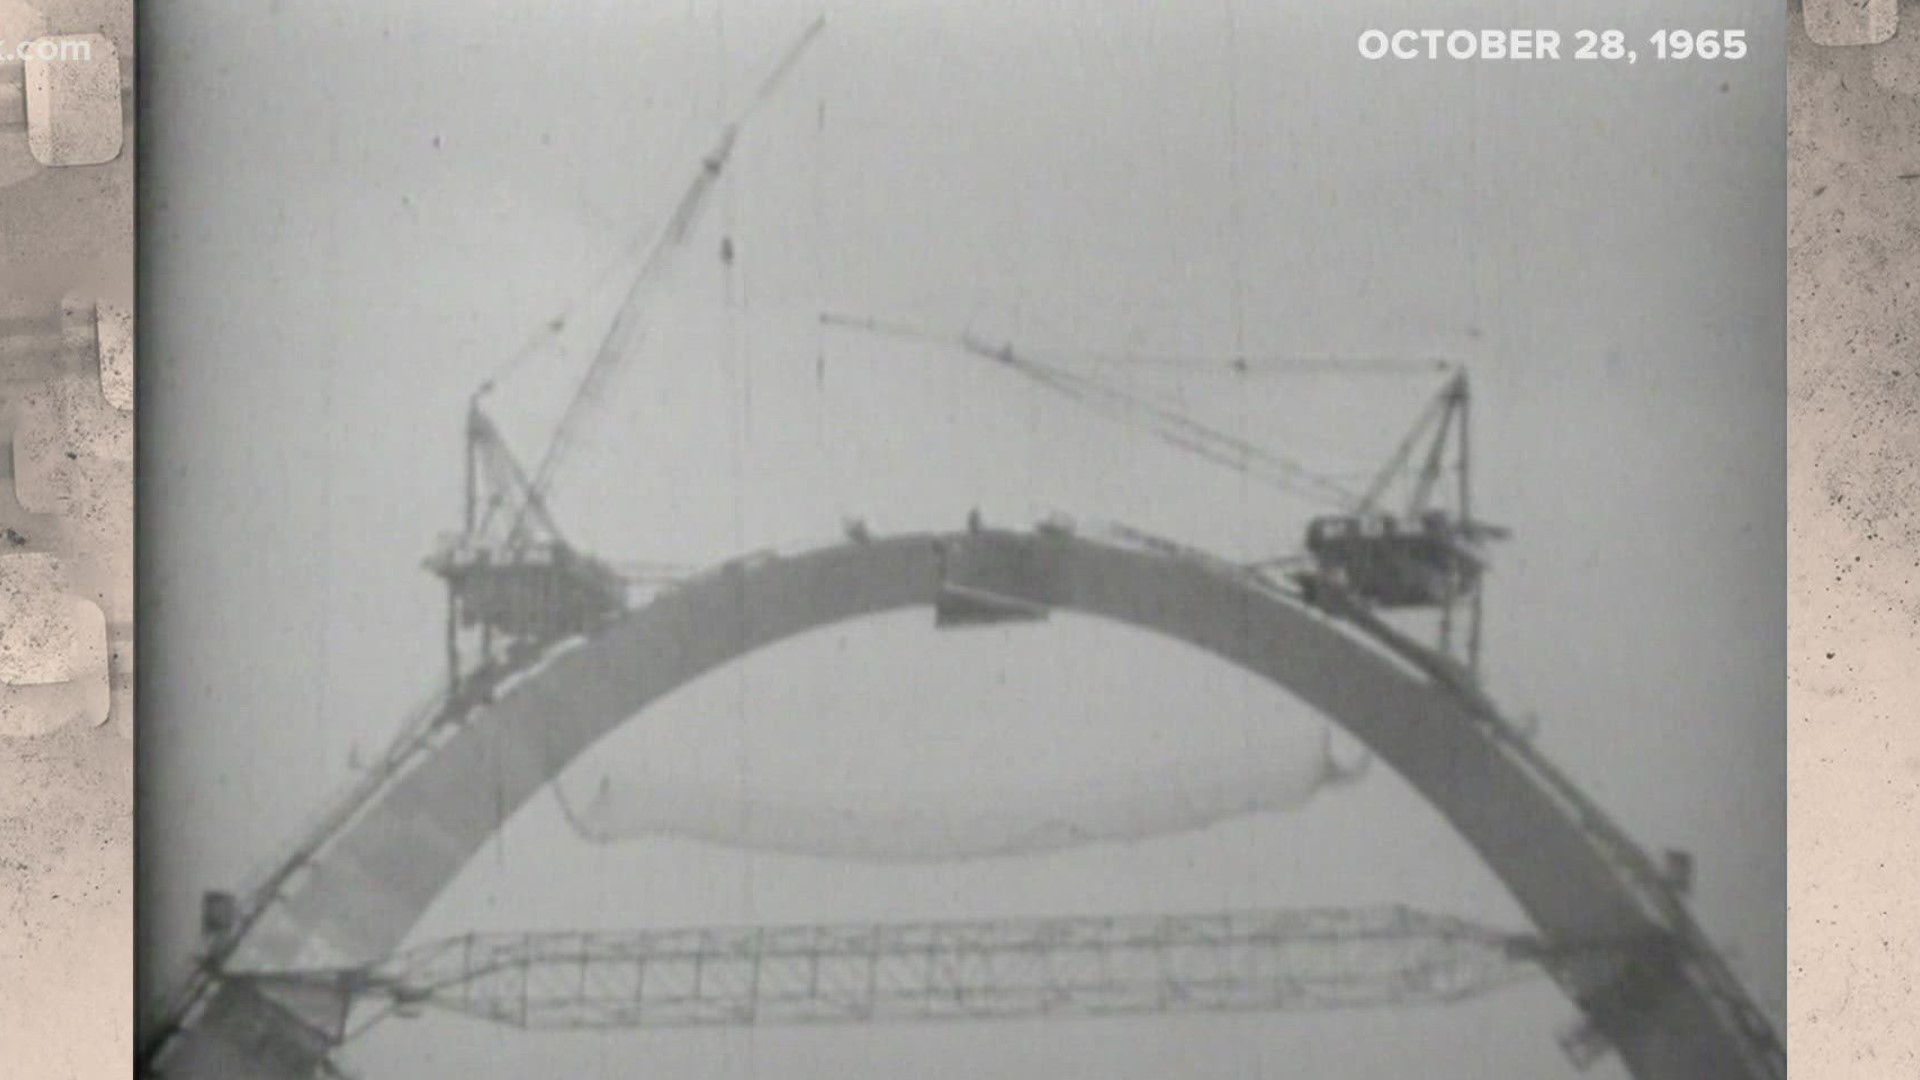 This week's Vintage KSDK takes us back to October 28, 1965. Fifty-six years ago, the final section of the Gateway Arch was lifted into place.